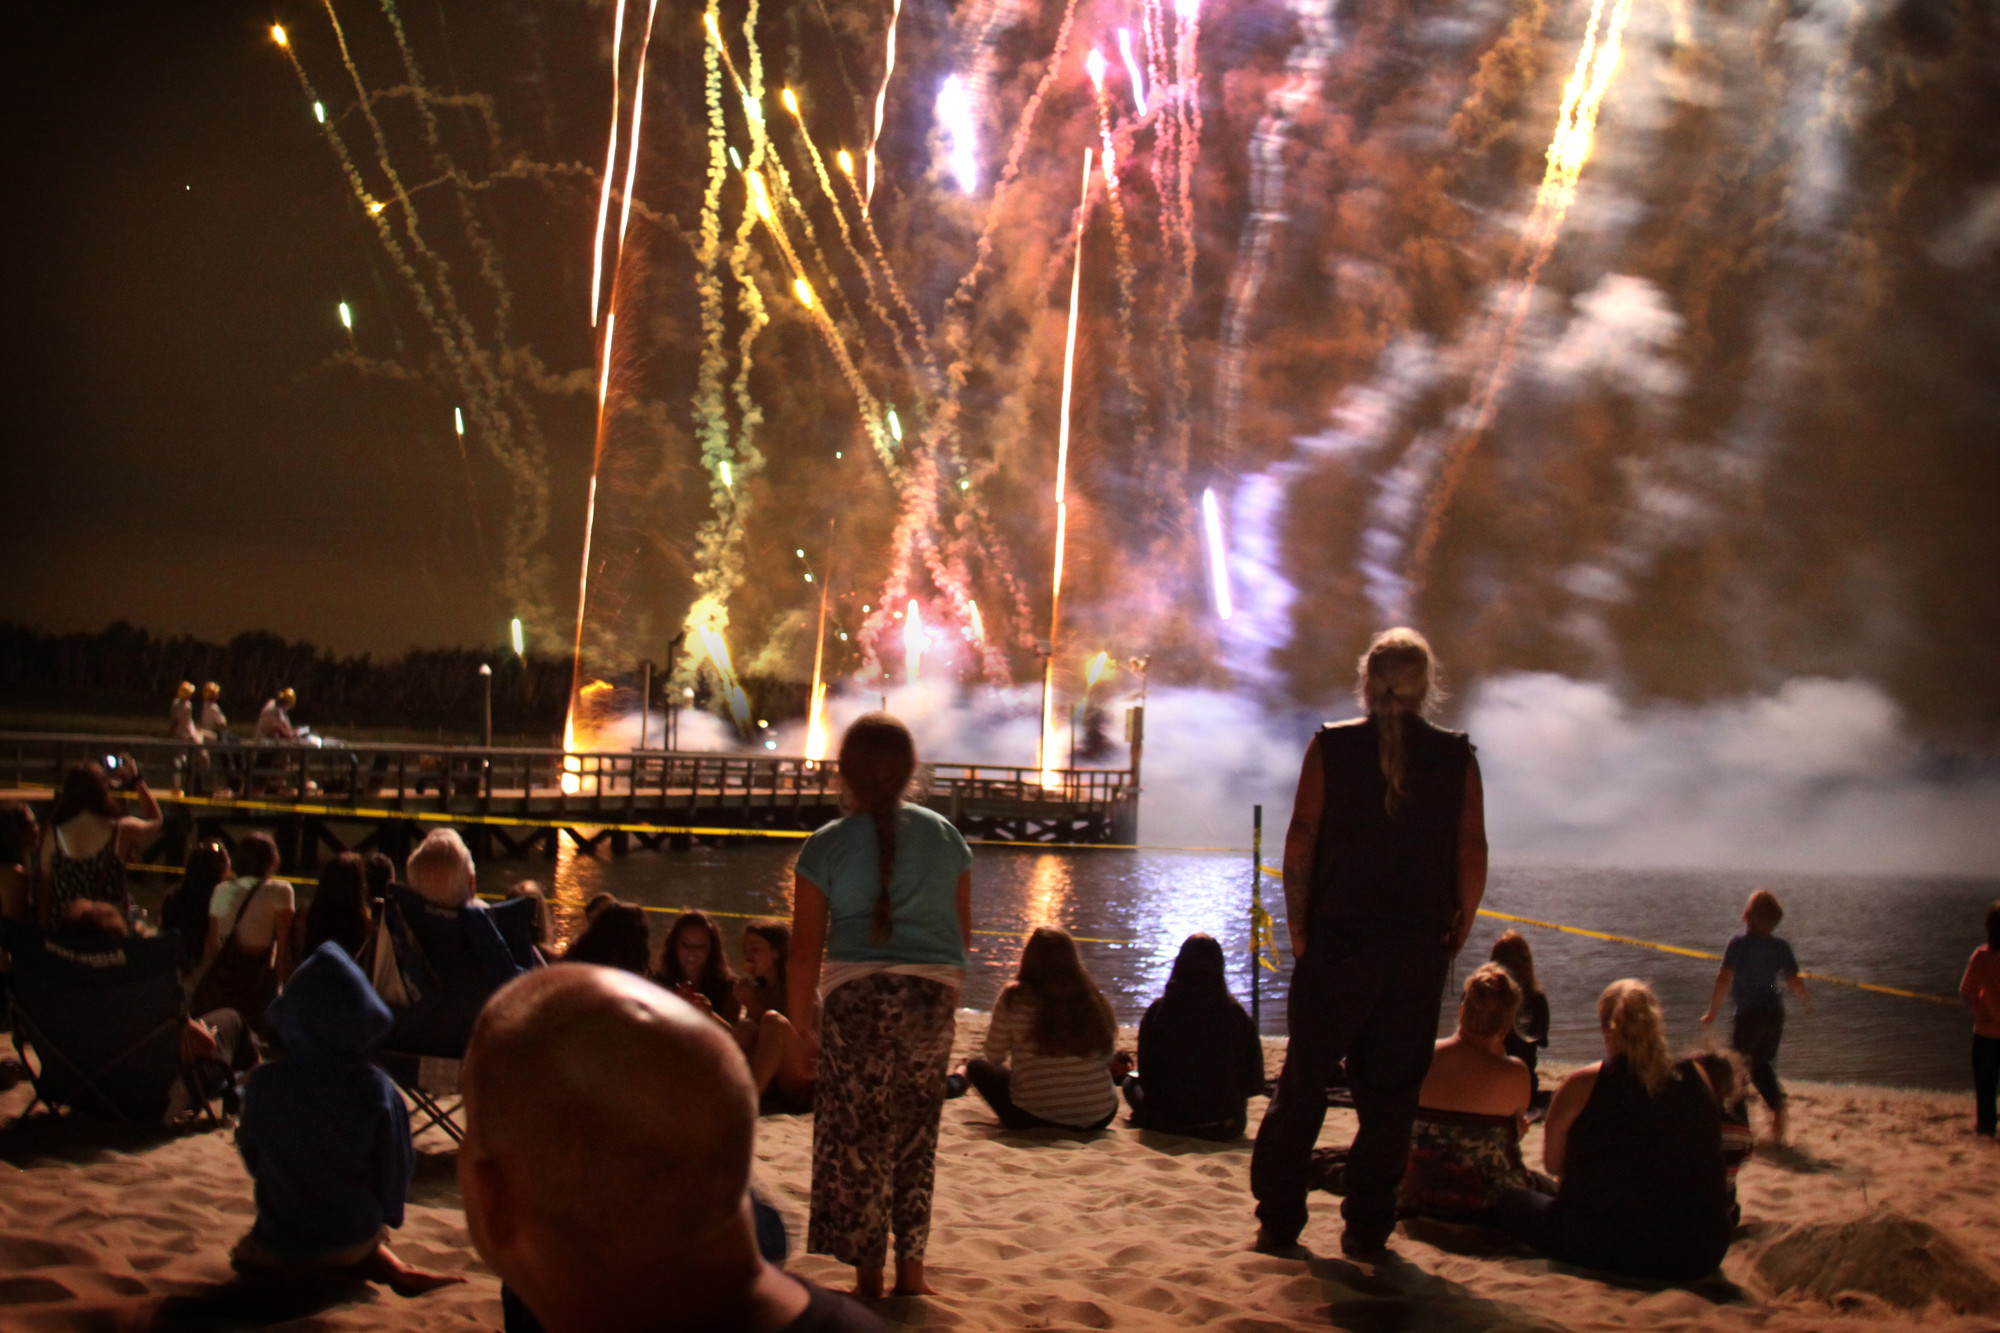 Grucci fireworks off Masone Beach brought a stirring conclusion to Island Park’s summer concert series on August 30.